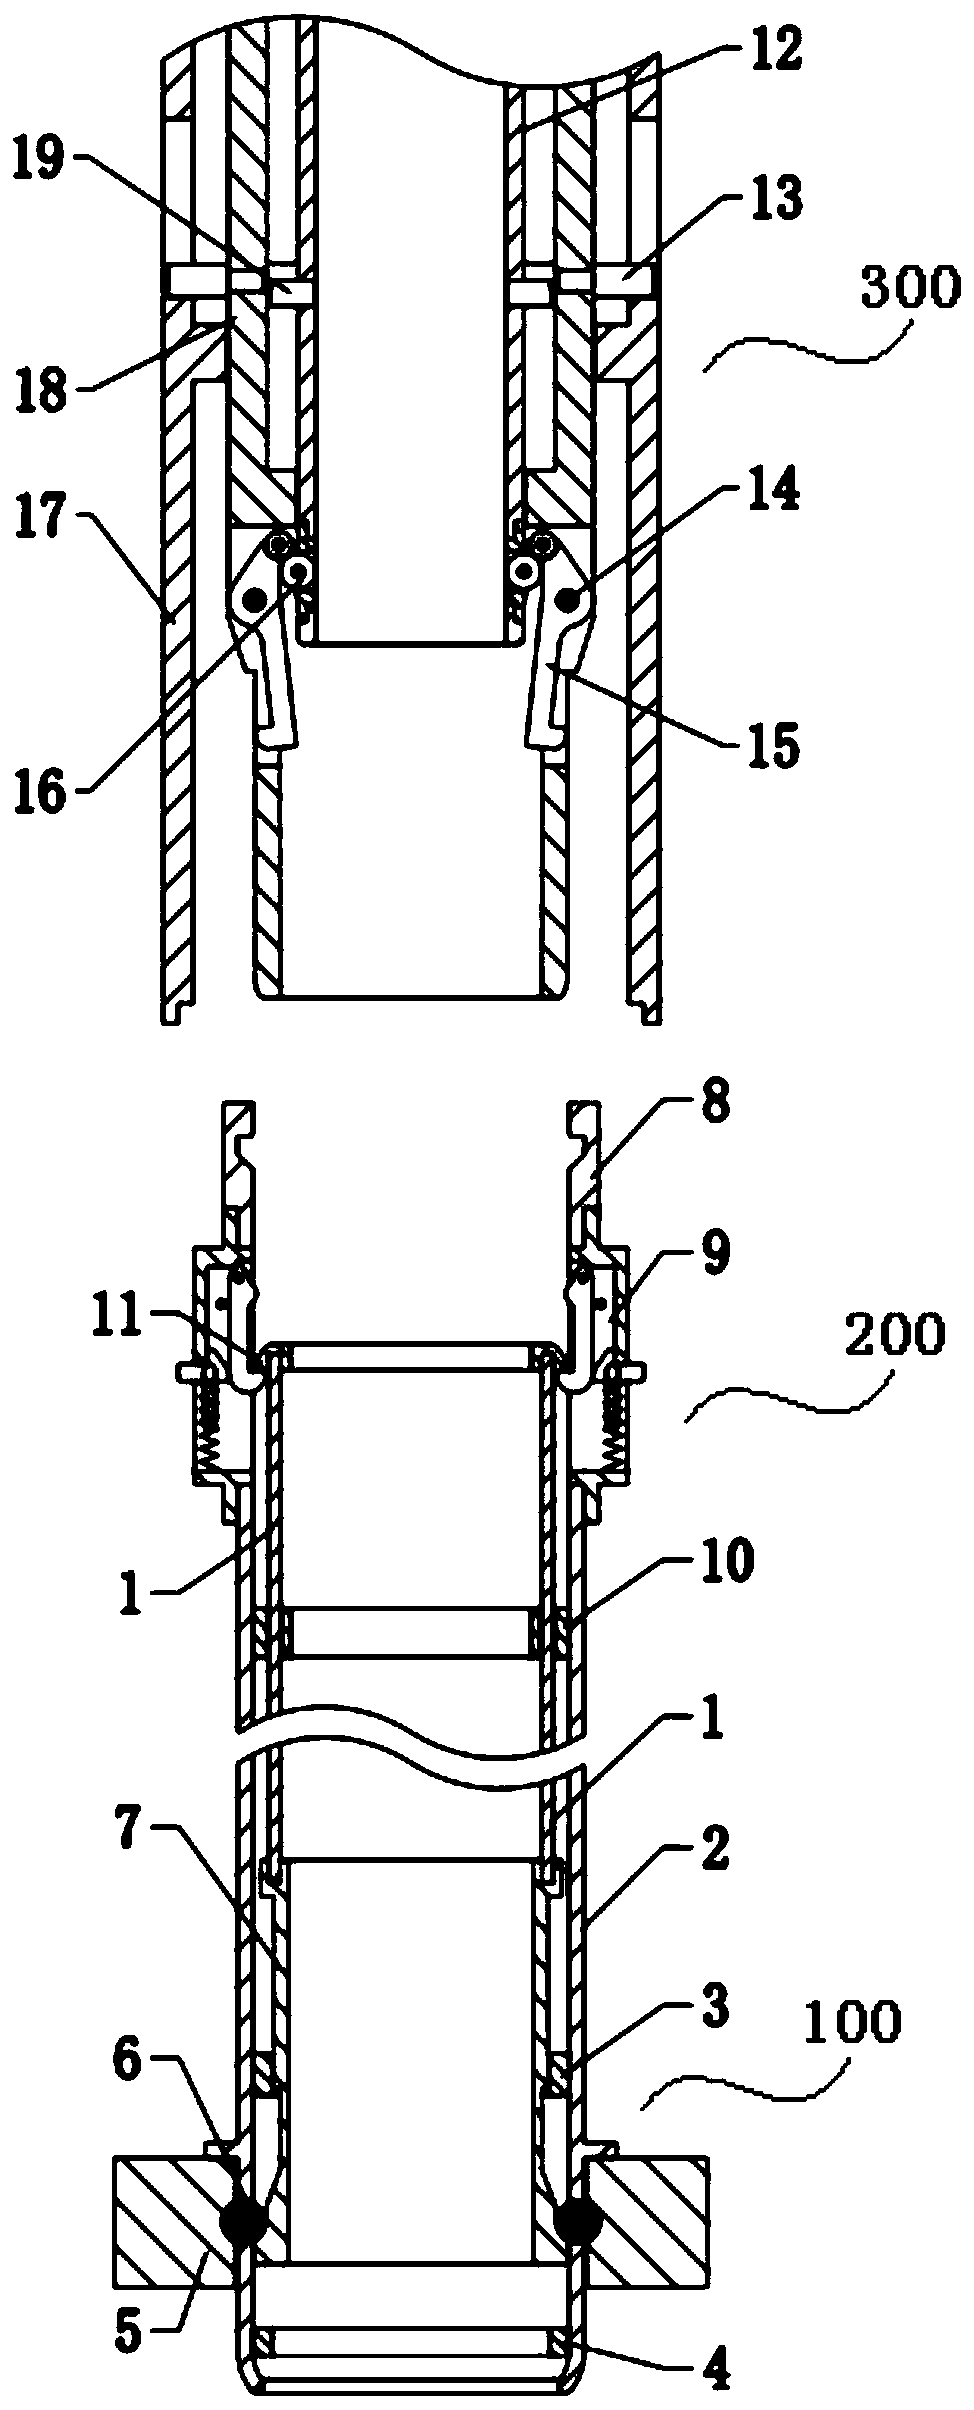 A locking, unlocking, grabbing and lifting device for lead-based reactor fuel assemblies